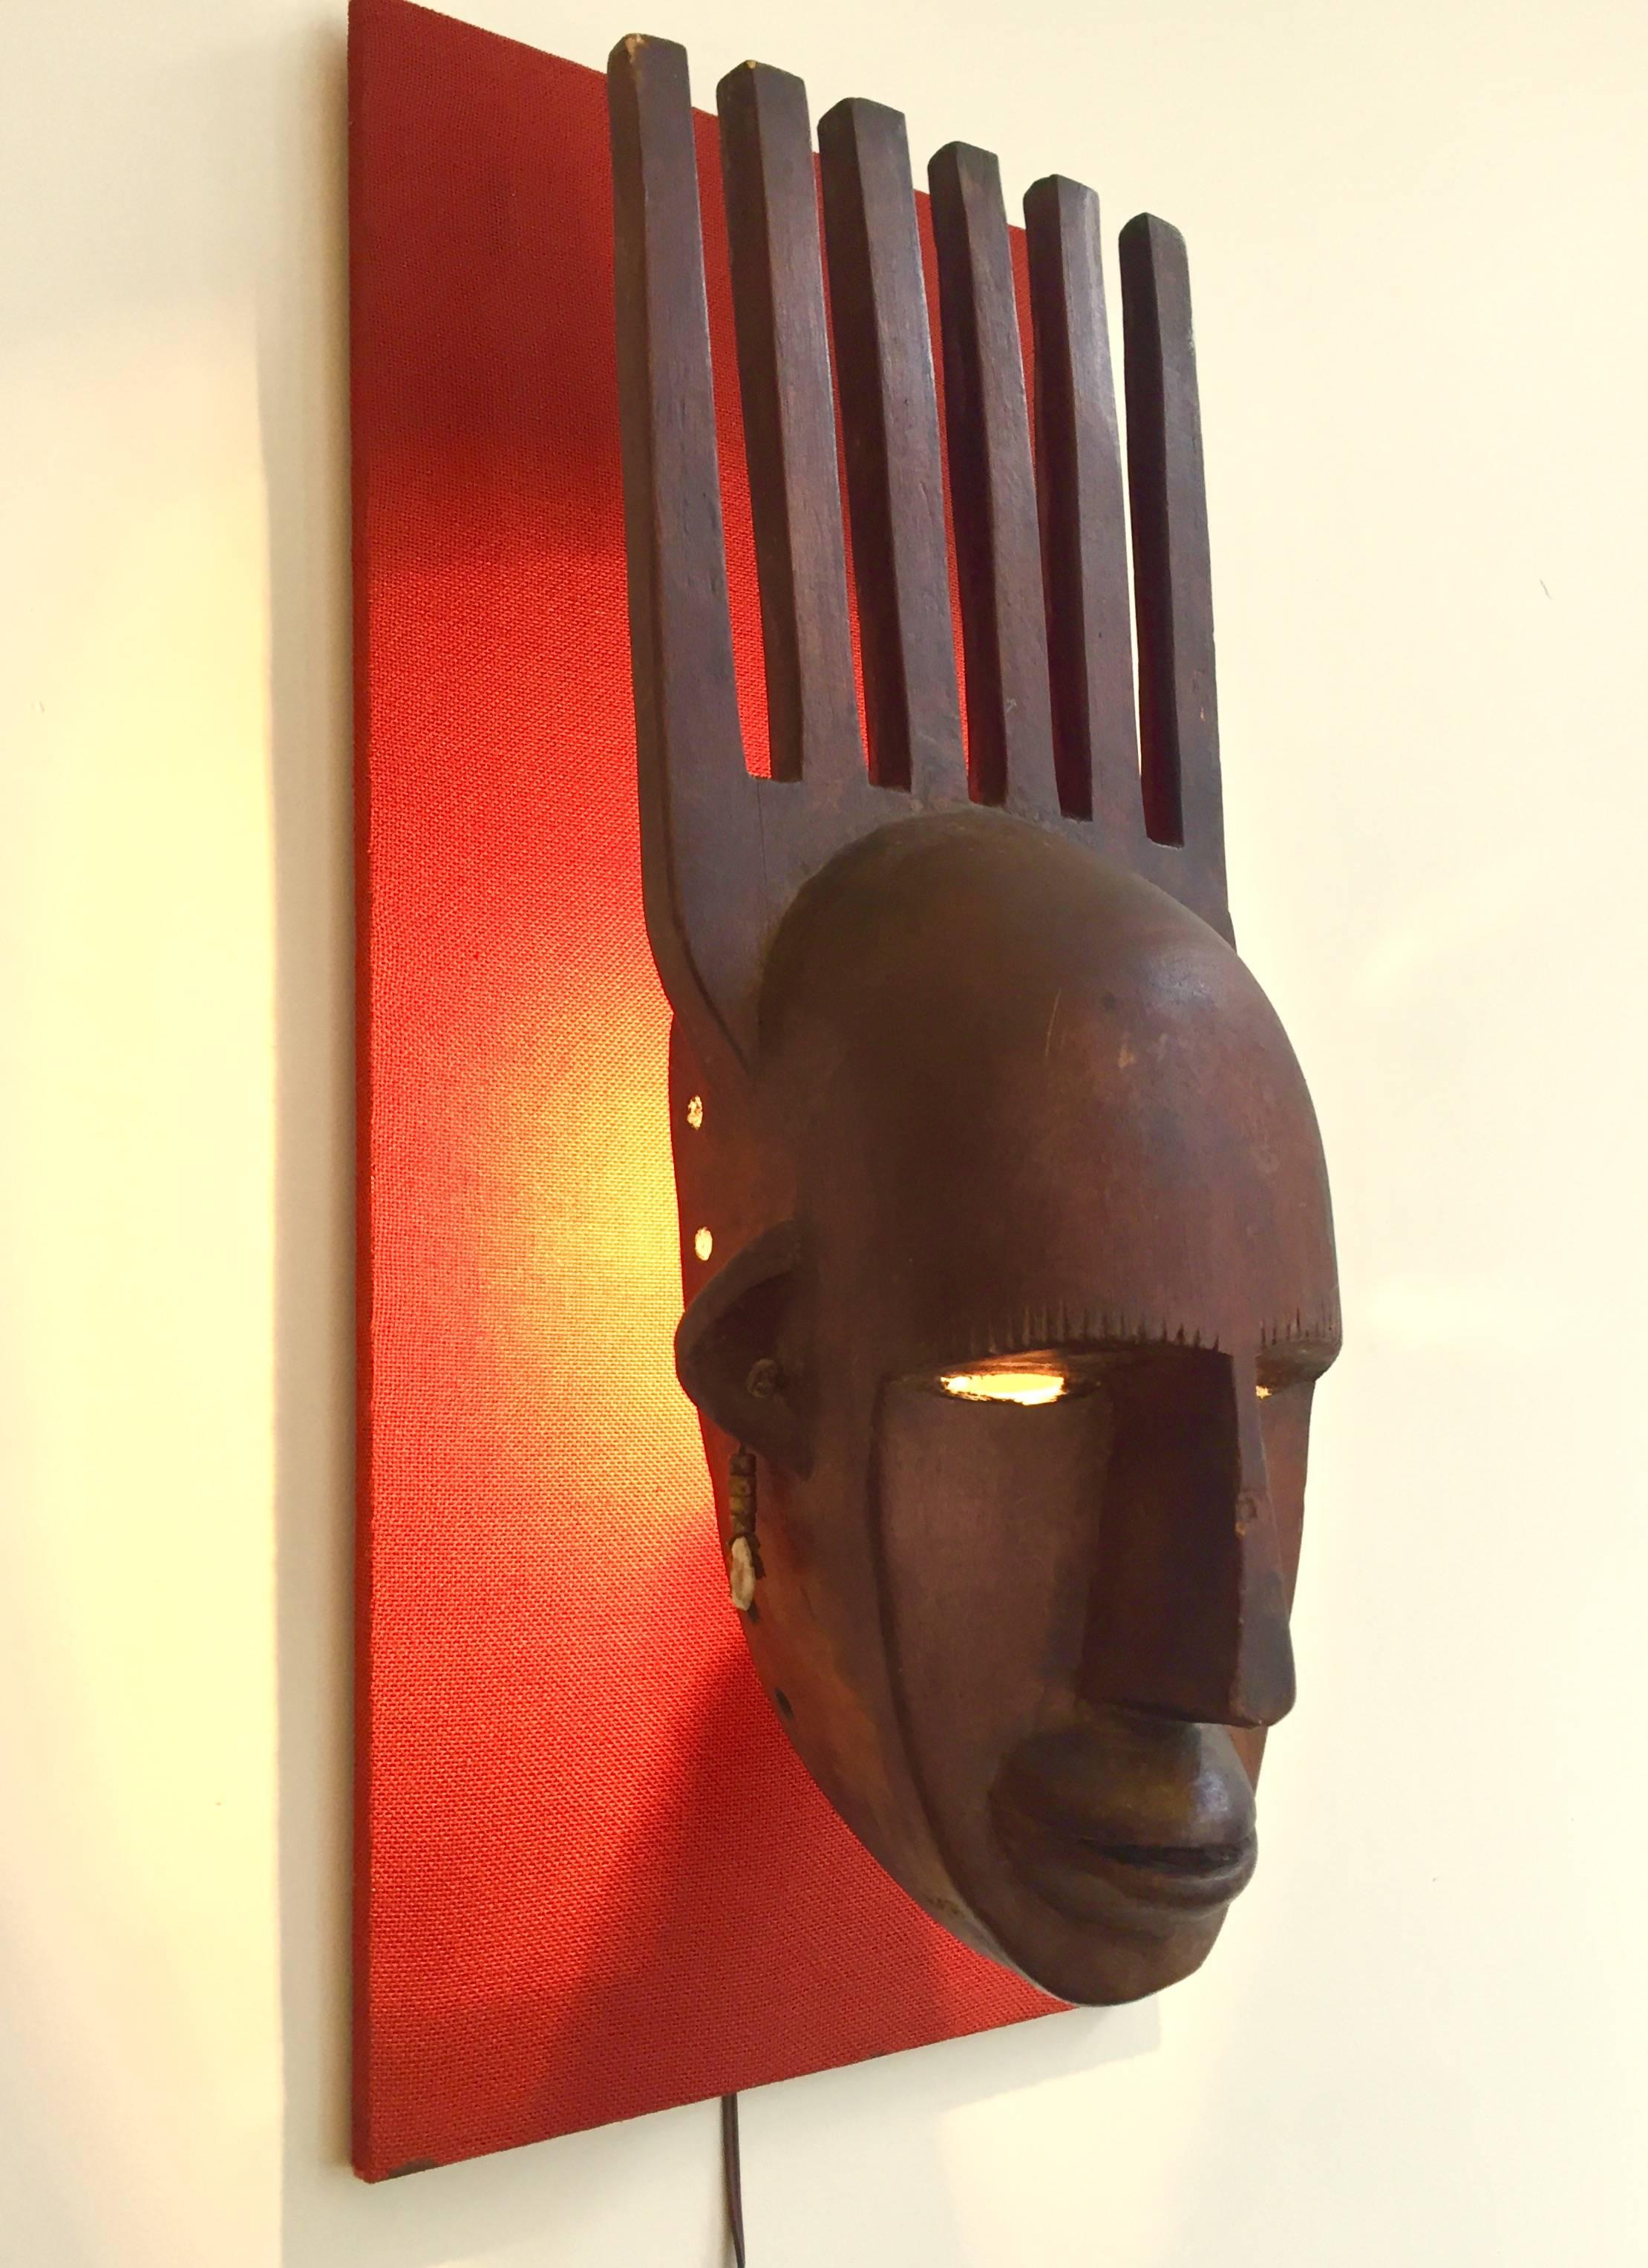 African (Mali) mask mounted on wooden panel with integrated light.